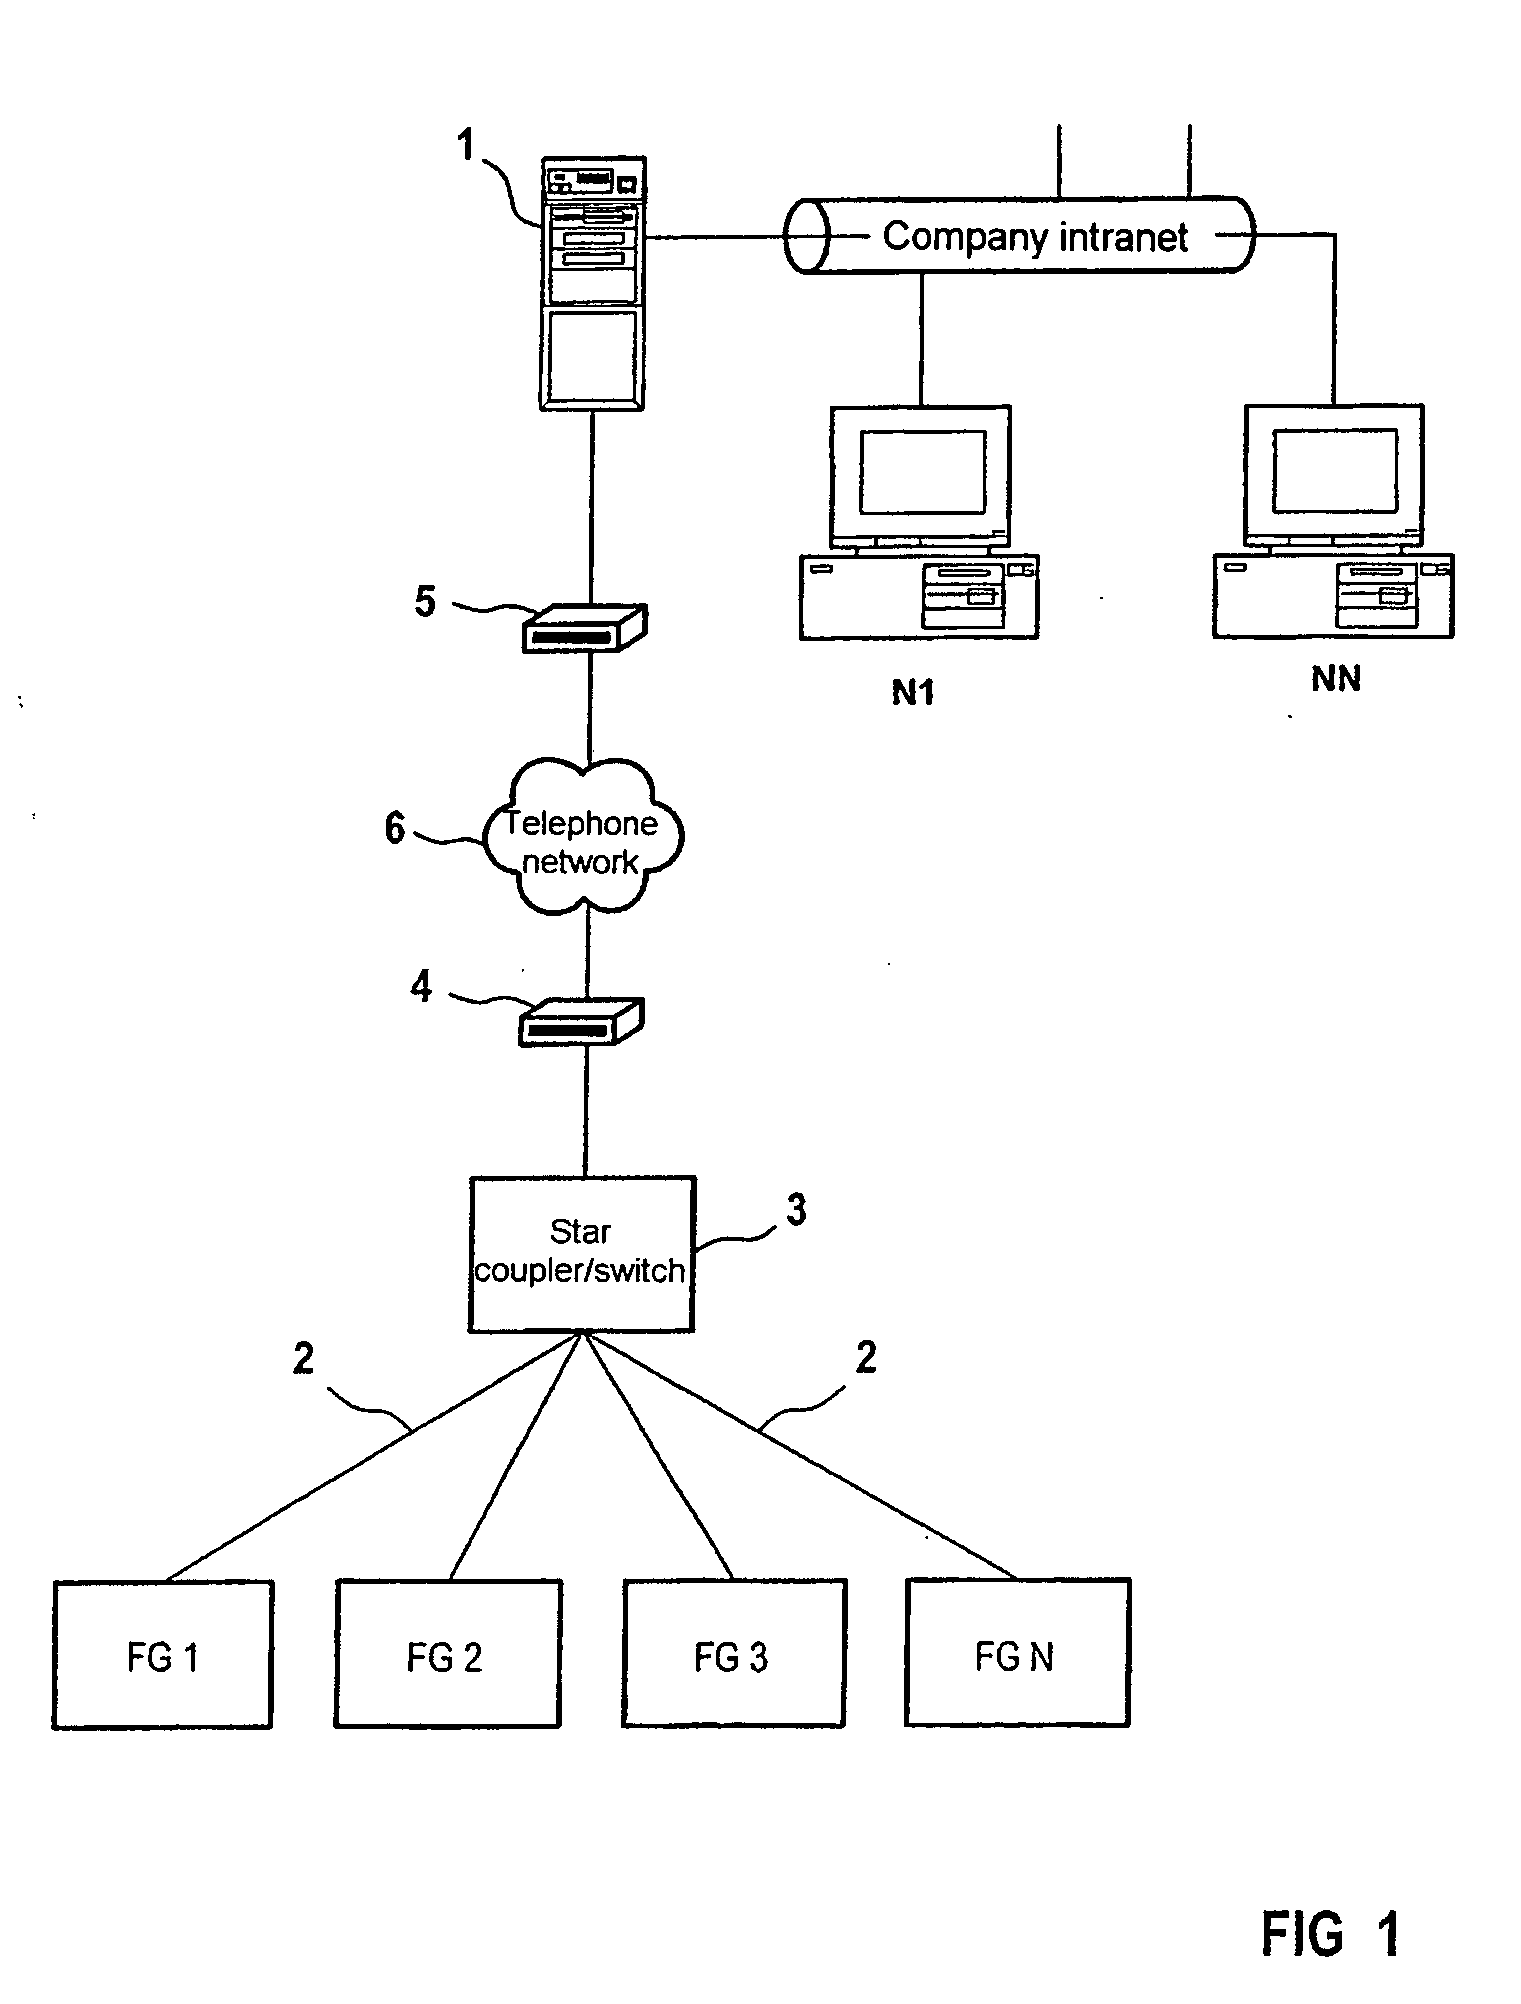 Method for implementing an operating and observation system for the field devices